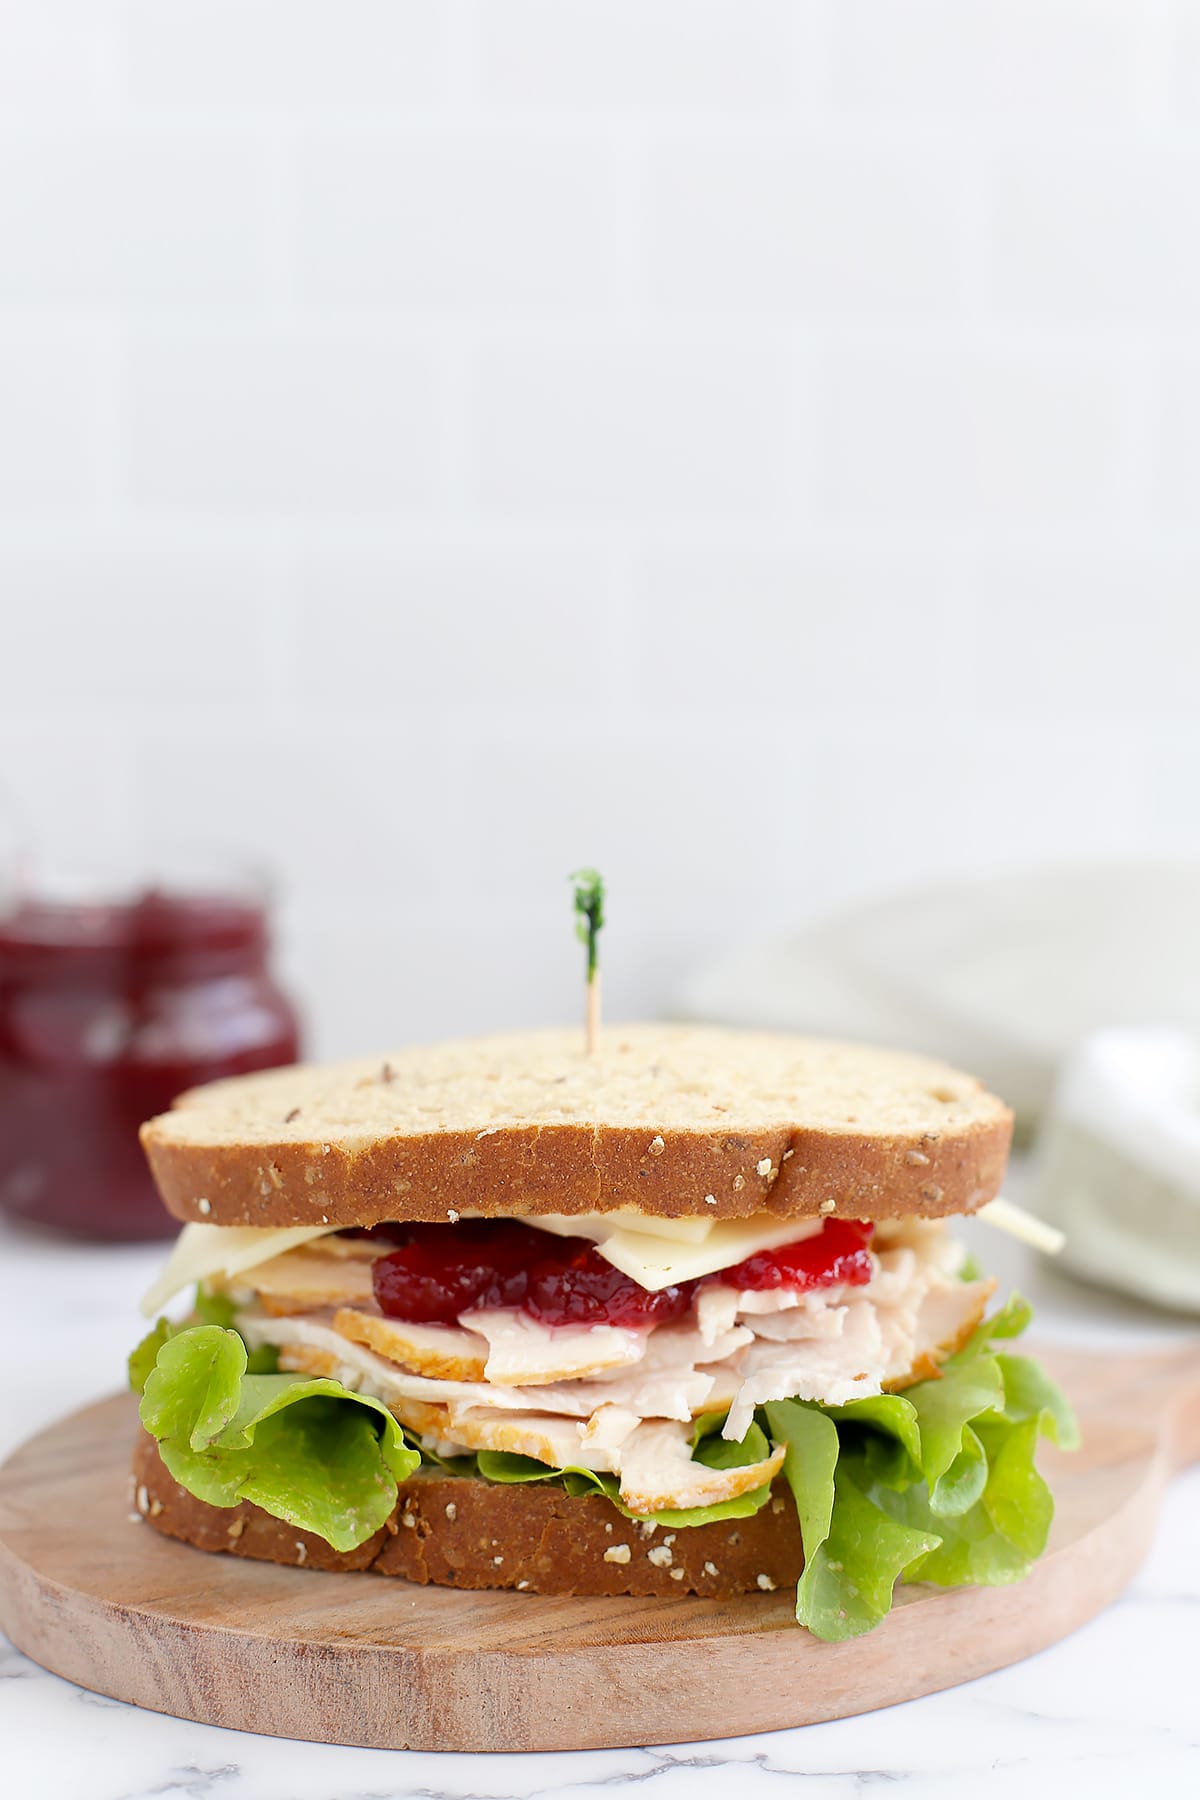 A turkey sandwich on wheat bread with cheese, cranberry sauce and lettuce on a wooden cutting board with a toothpick.